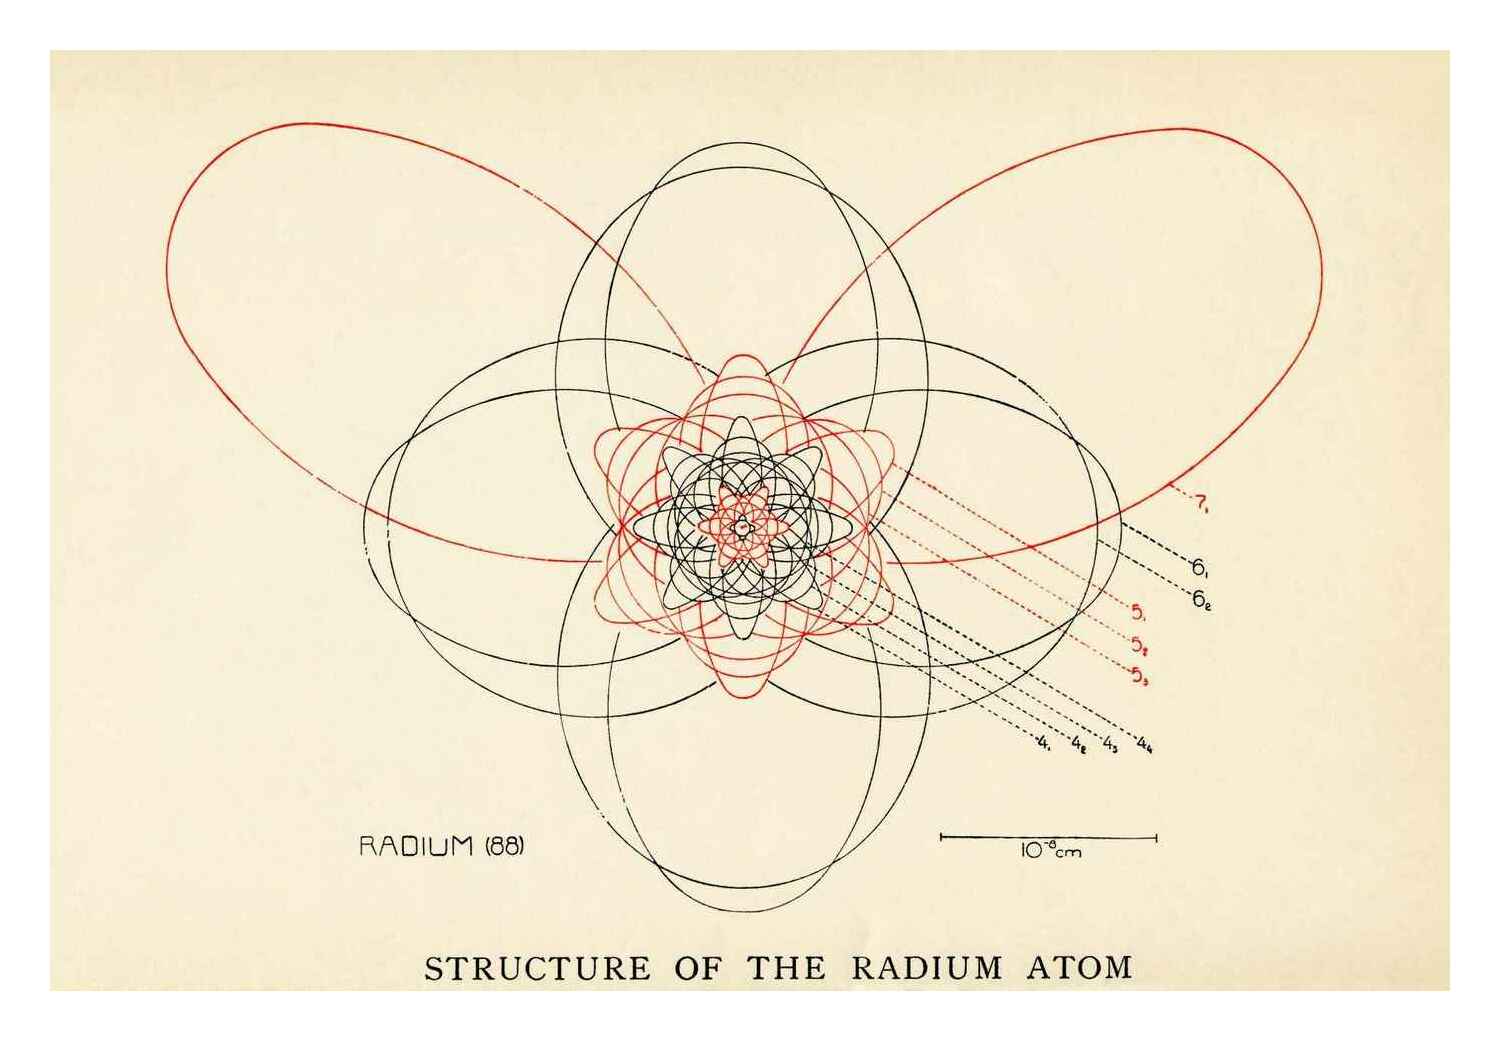 Rubrication denotes odd vs even electron orbitals in this schematic atom diagram, “Principal Features of Atomic Structure in Some of the Elements—Atomic Structure of Radium”; color plate #2, pg217, The atom and the Bohr theory of its structure: an elementary presentation, Holst & Kramers 1922